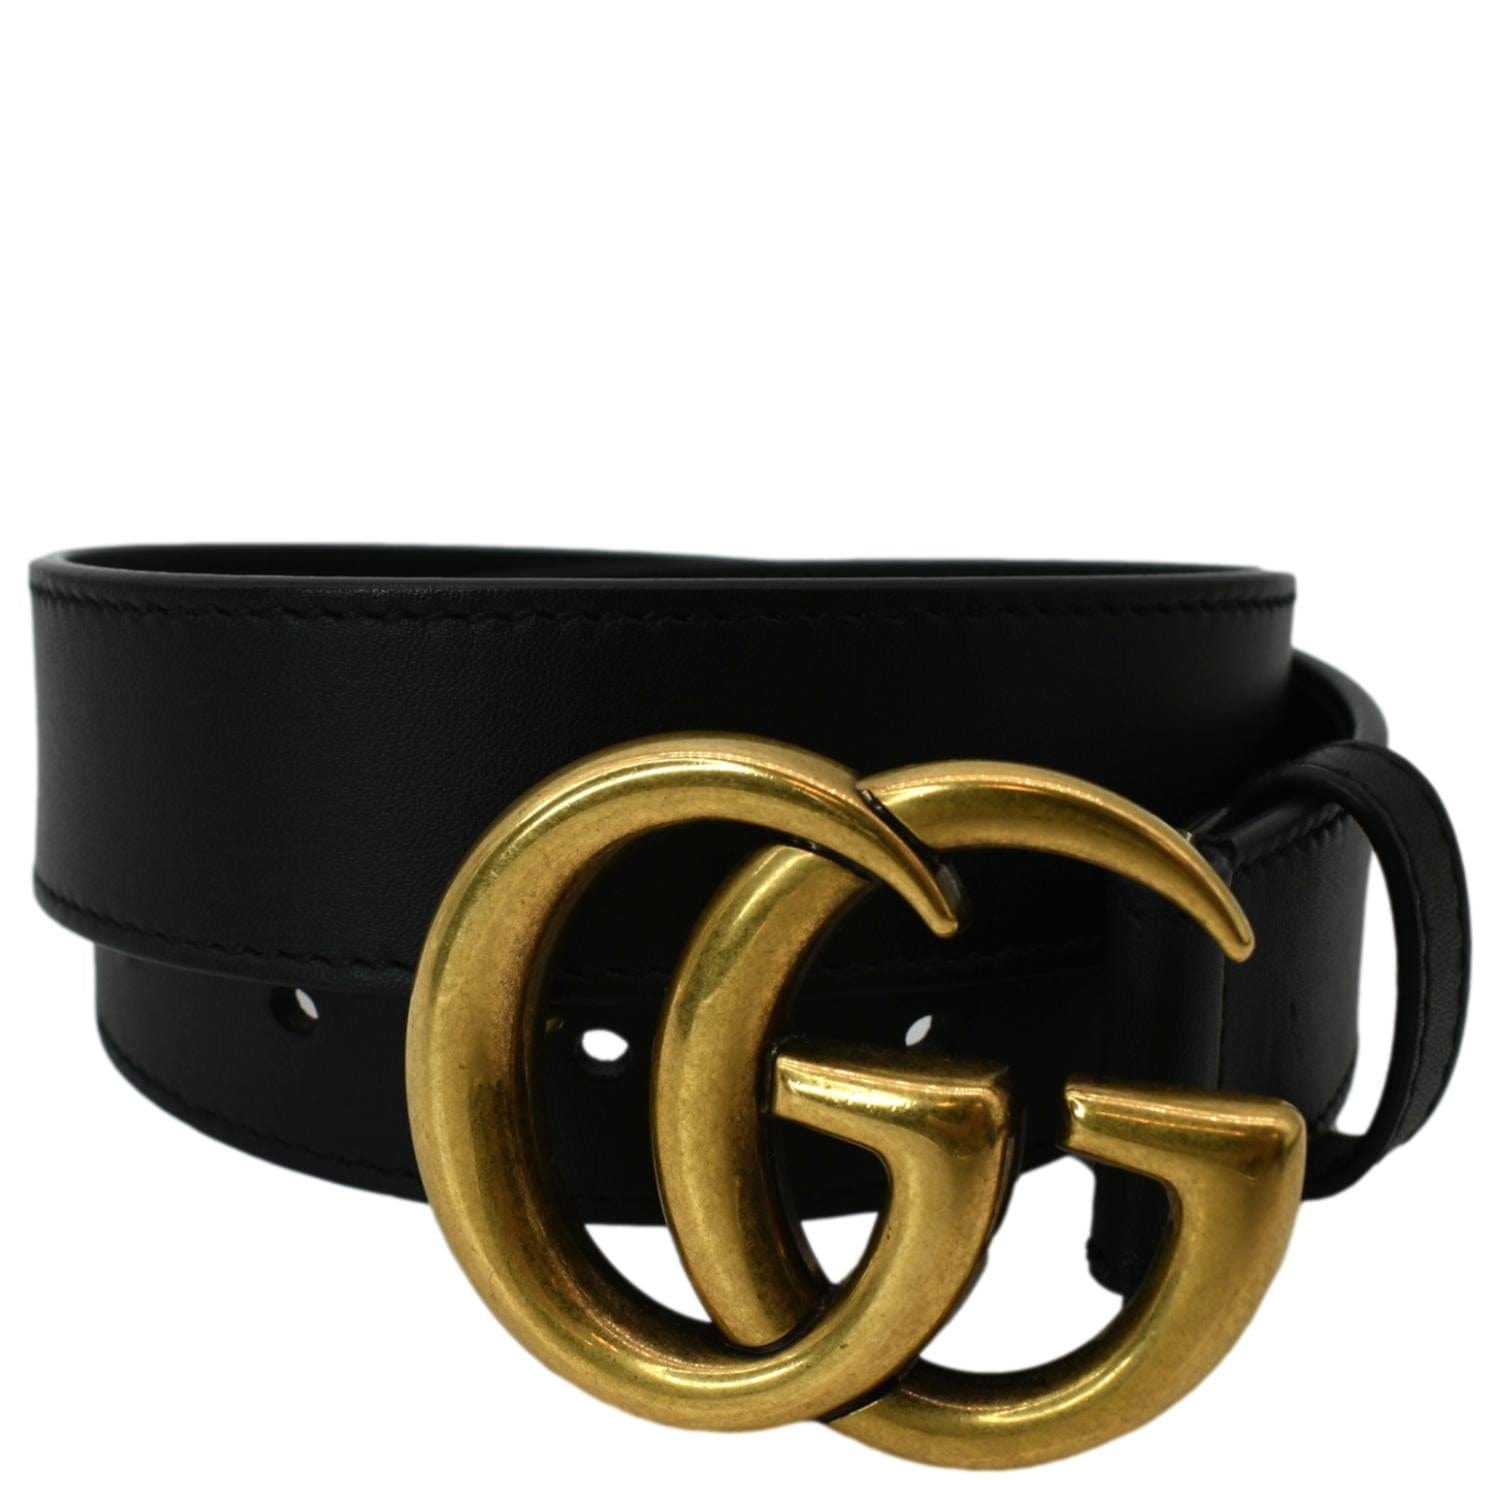 Gucci Gucci Leather Belt GG Buckle Black/Gold